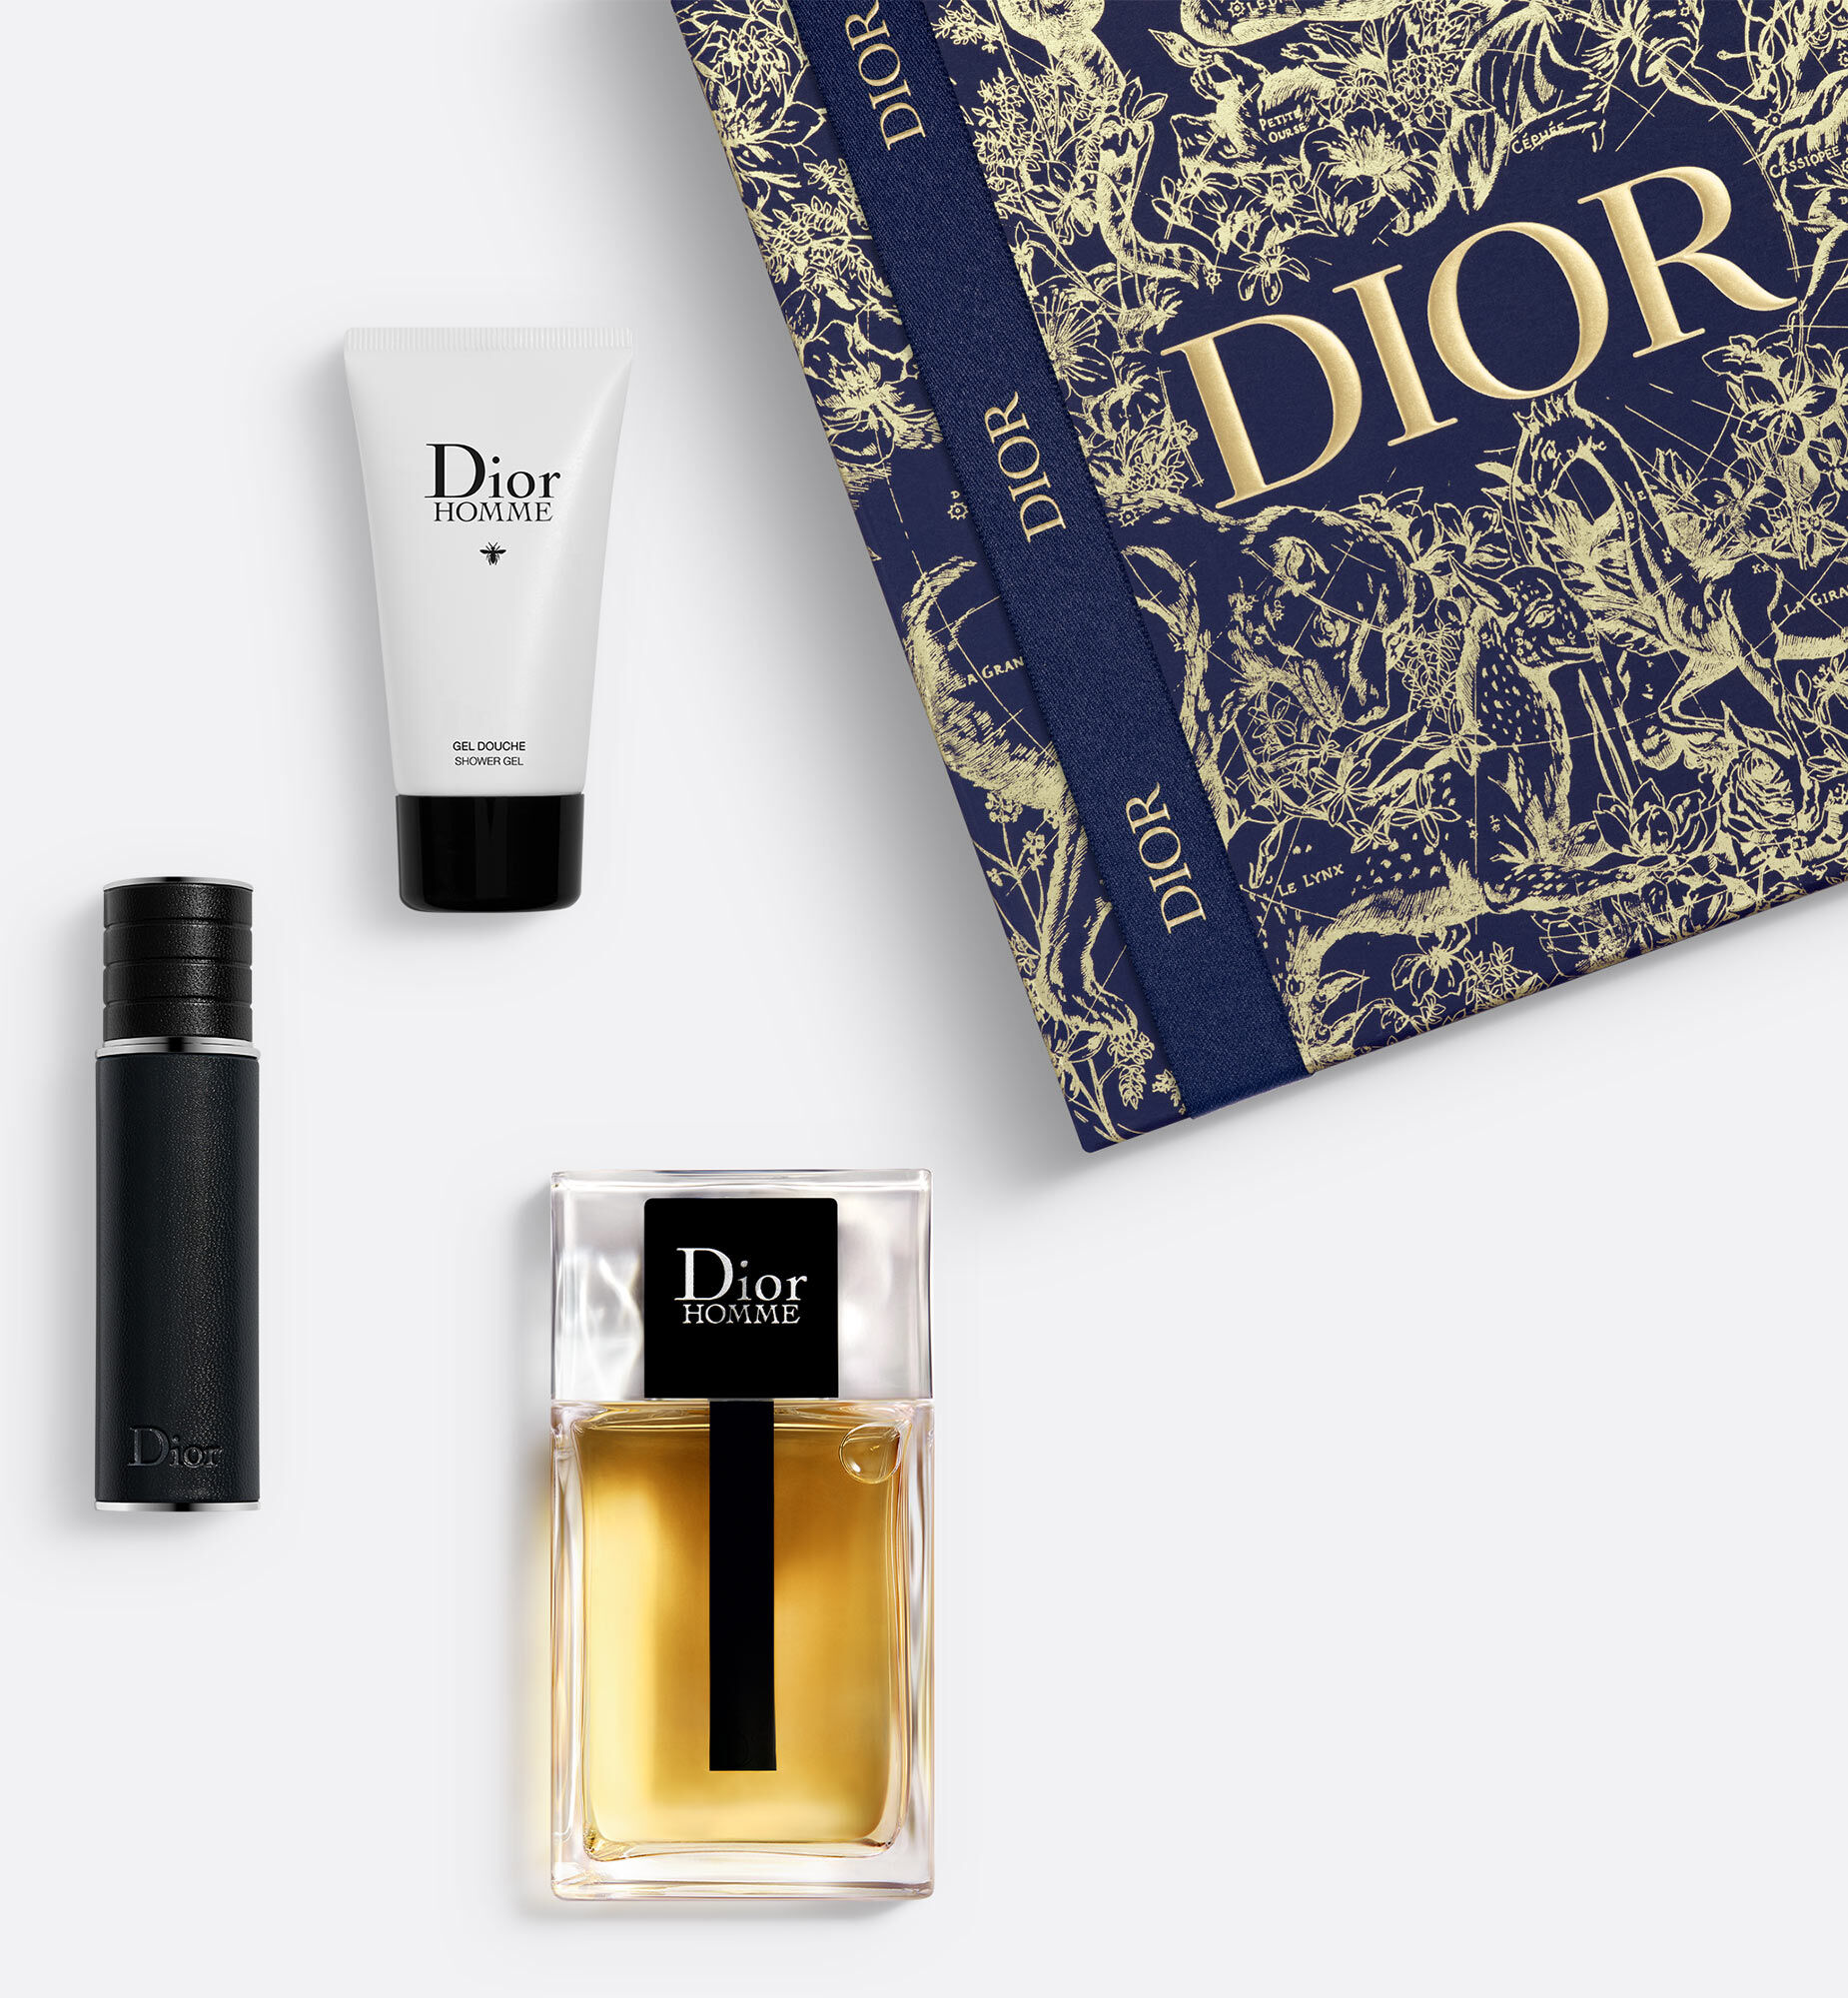 Staying home in 2021 still rhymes with selfcare mrdinoco uses Dior  Homme Shower Gel for an invigorating bath routine th  Dior beauty Beauty  lover Dior homme